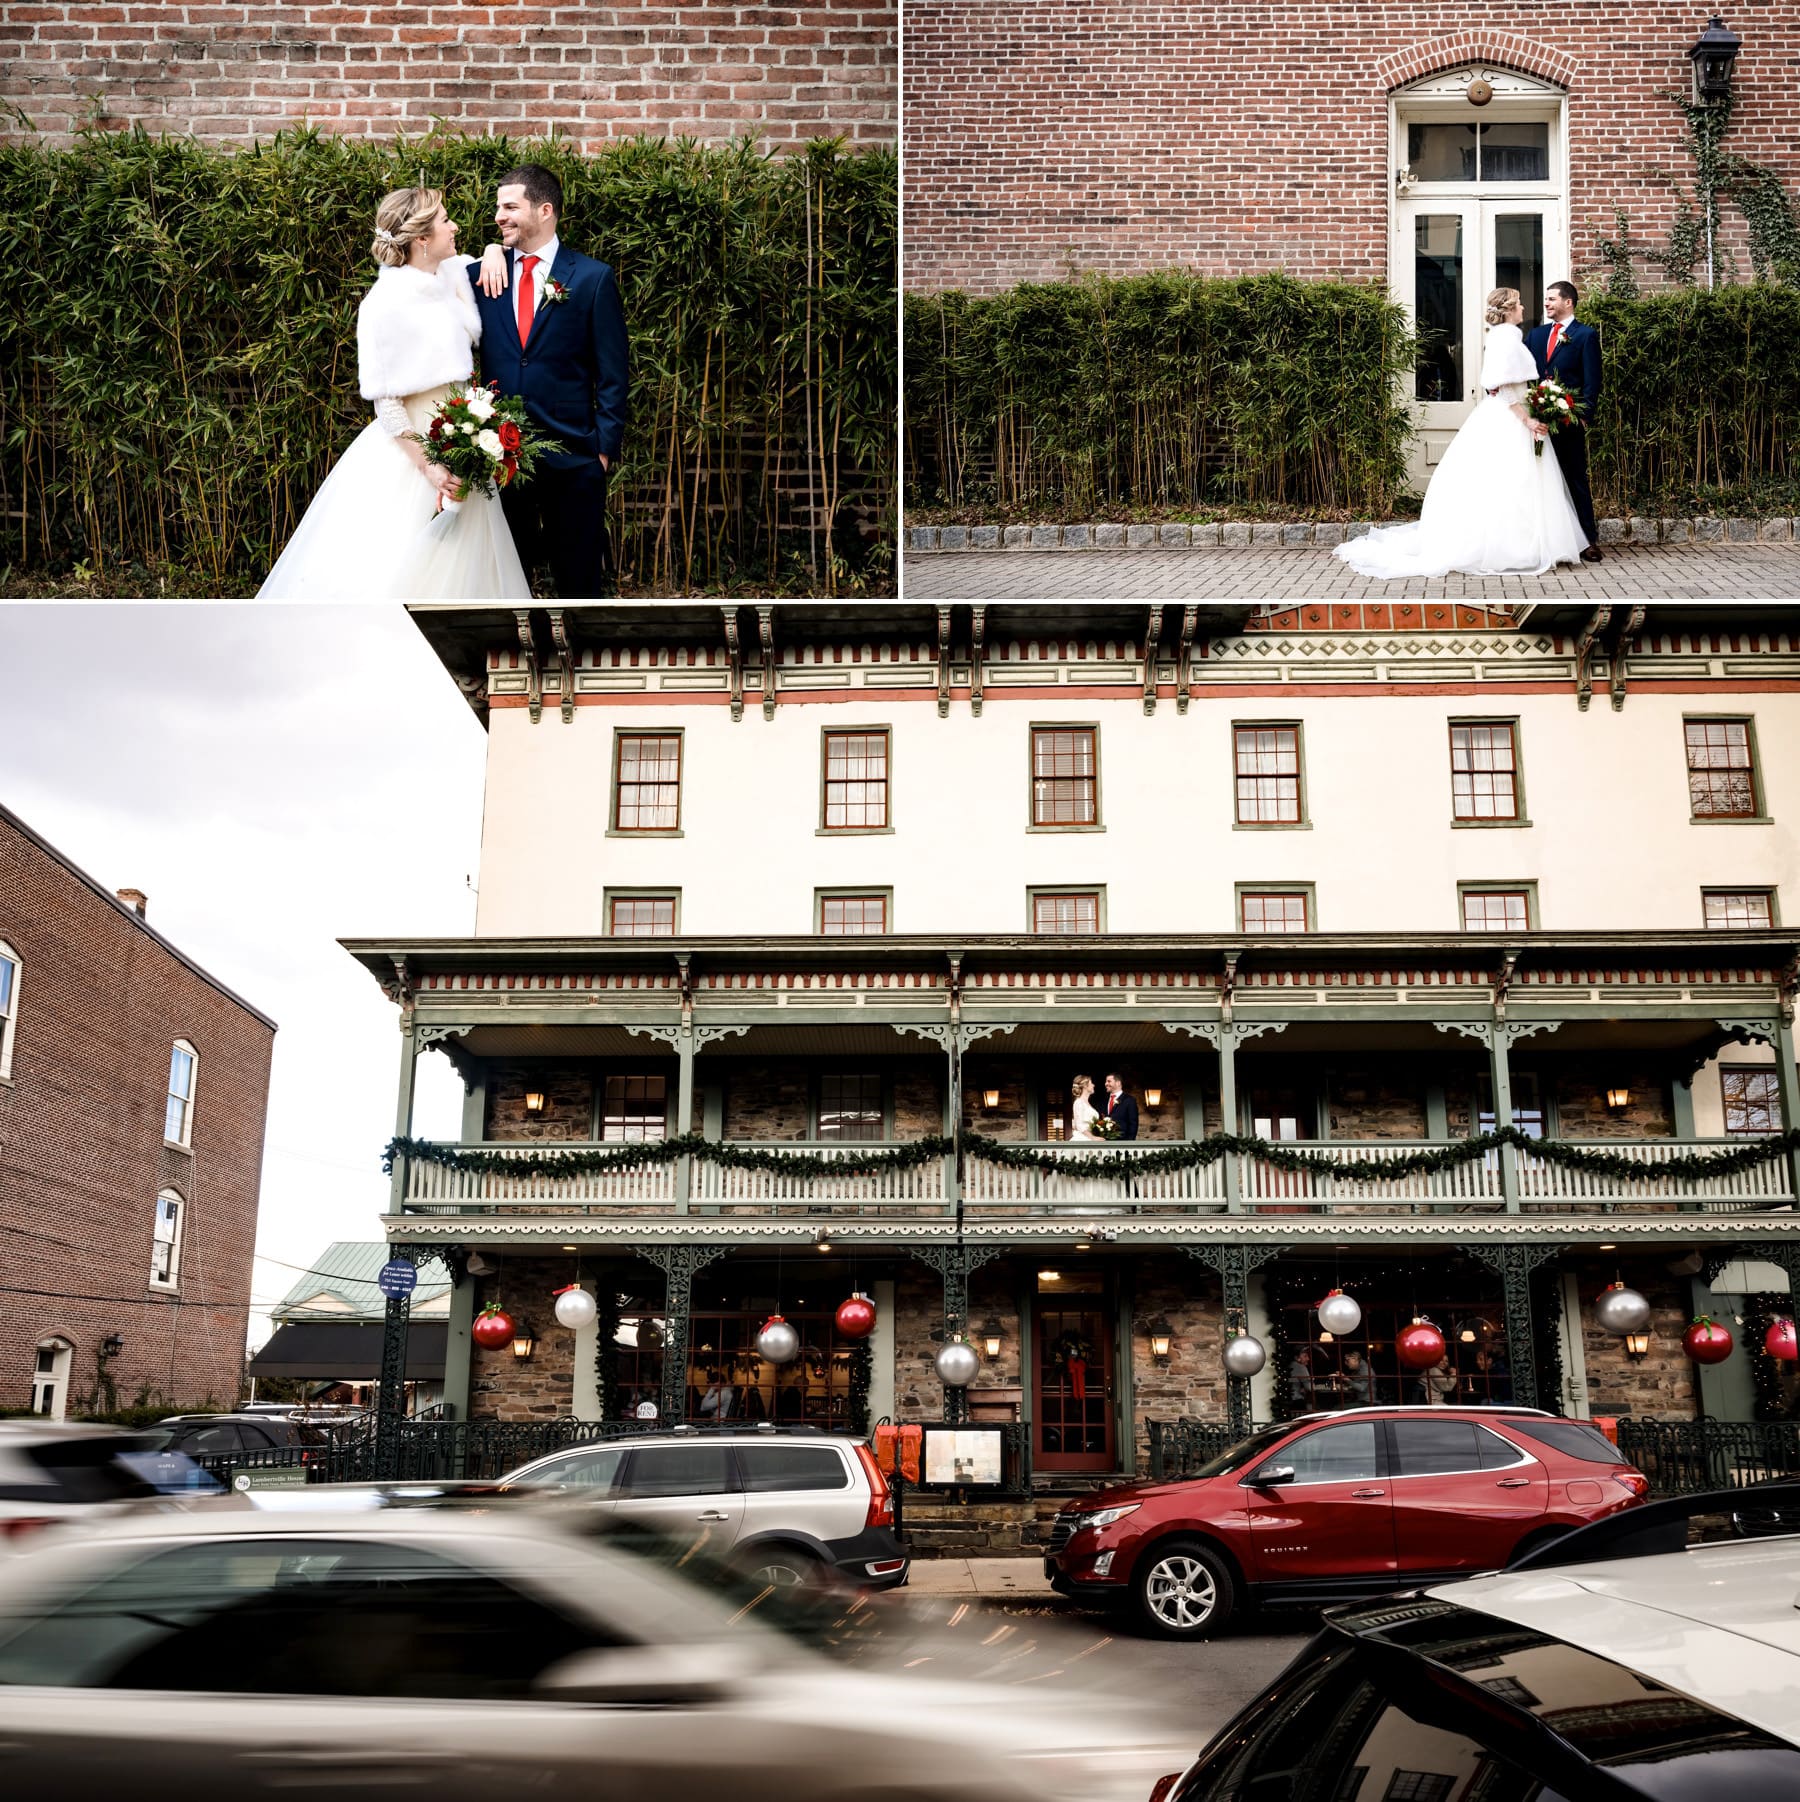 Holiday weddings at The Lambertville House